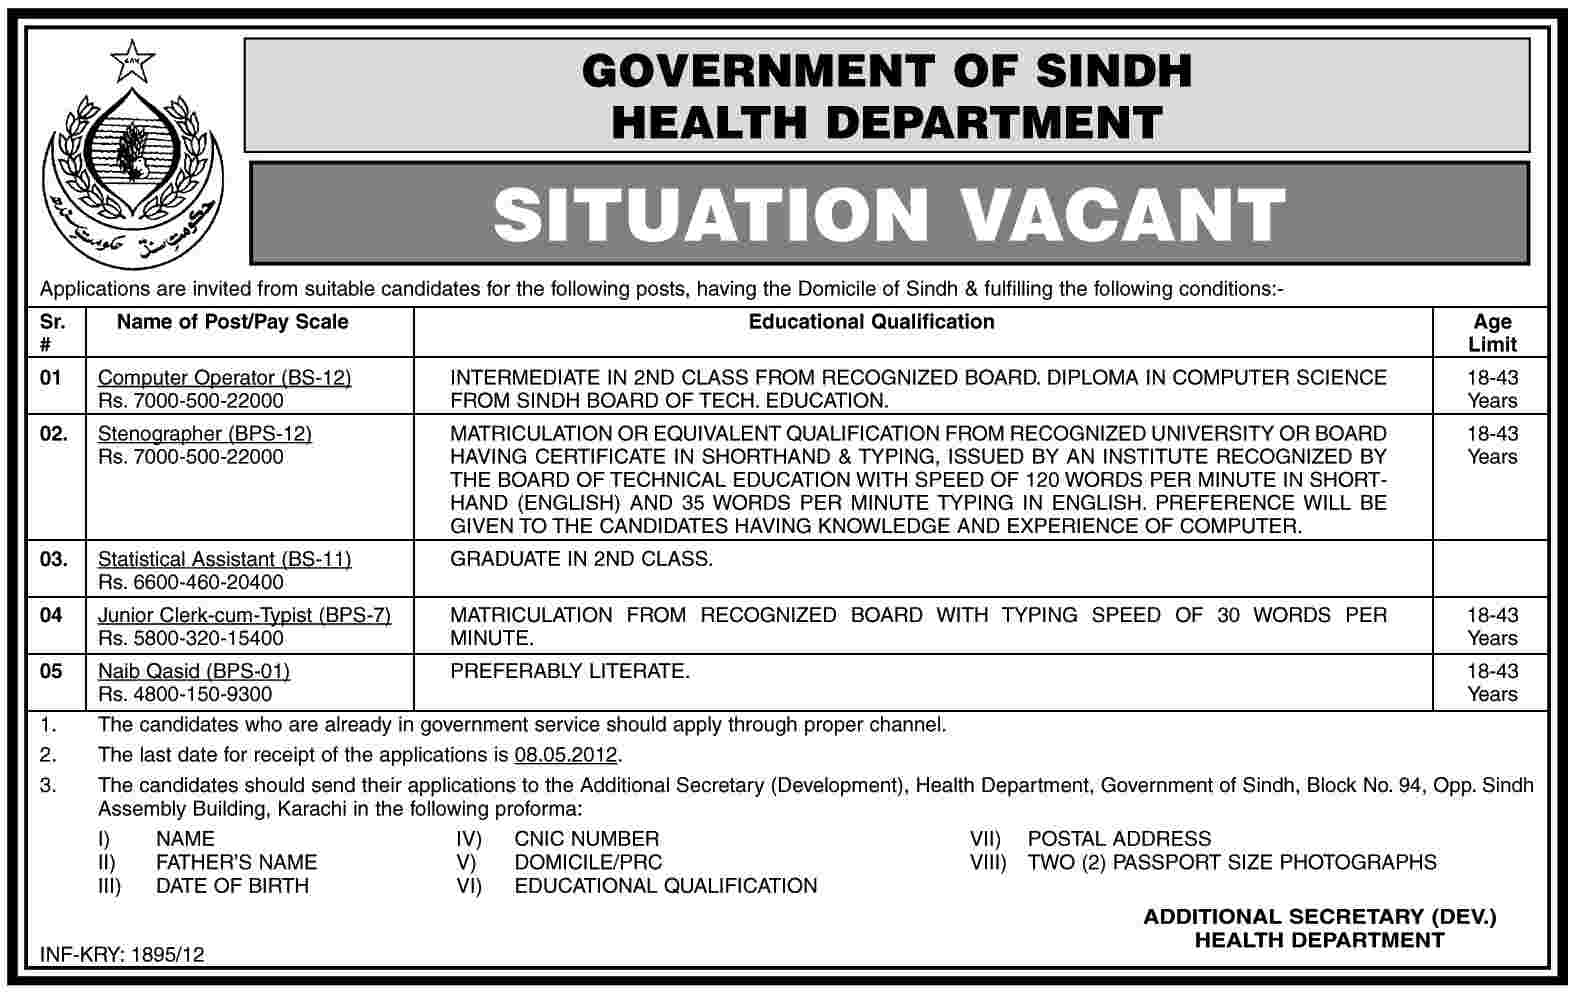 Jobs in Health Department Government of Sindh (Govt. job)